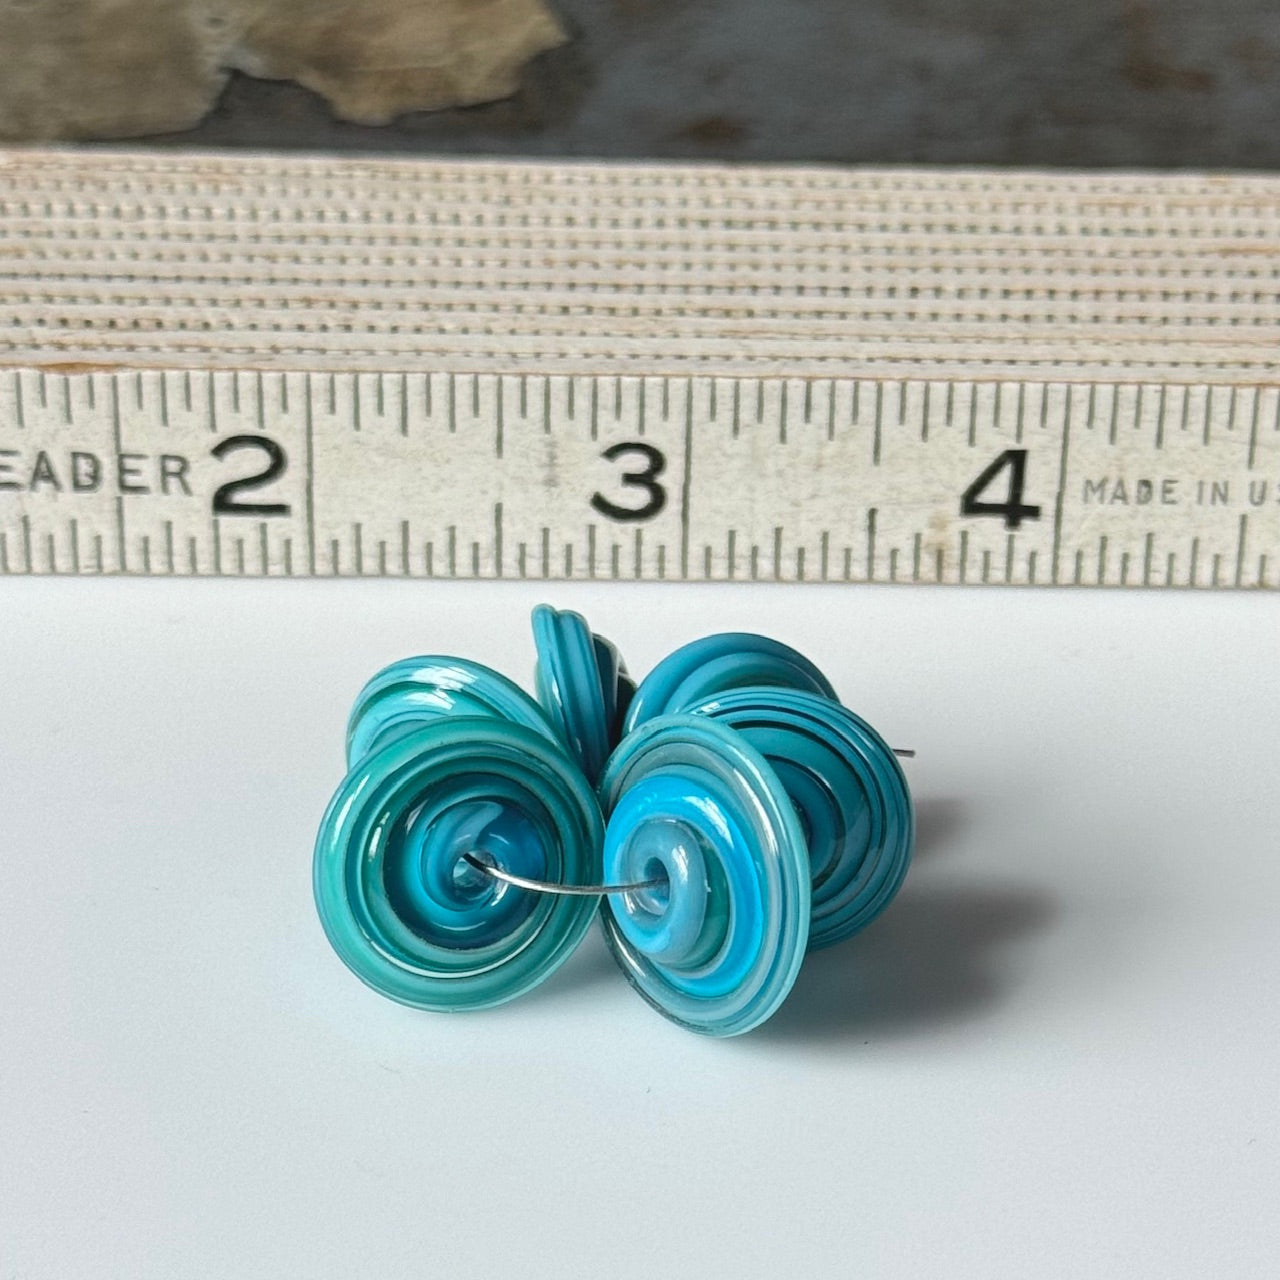 CHUNKY DISCS - Turquoise Spirals Smaller